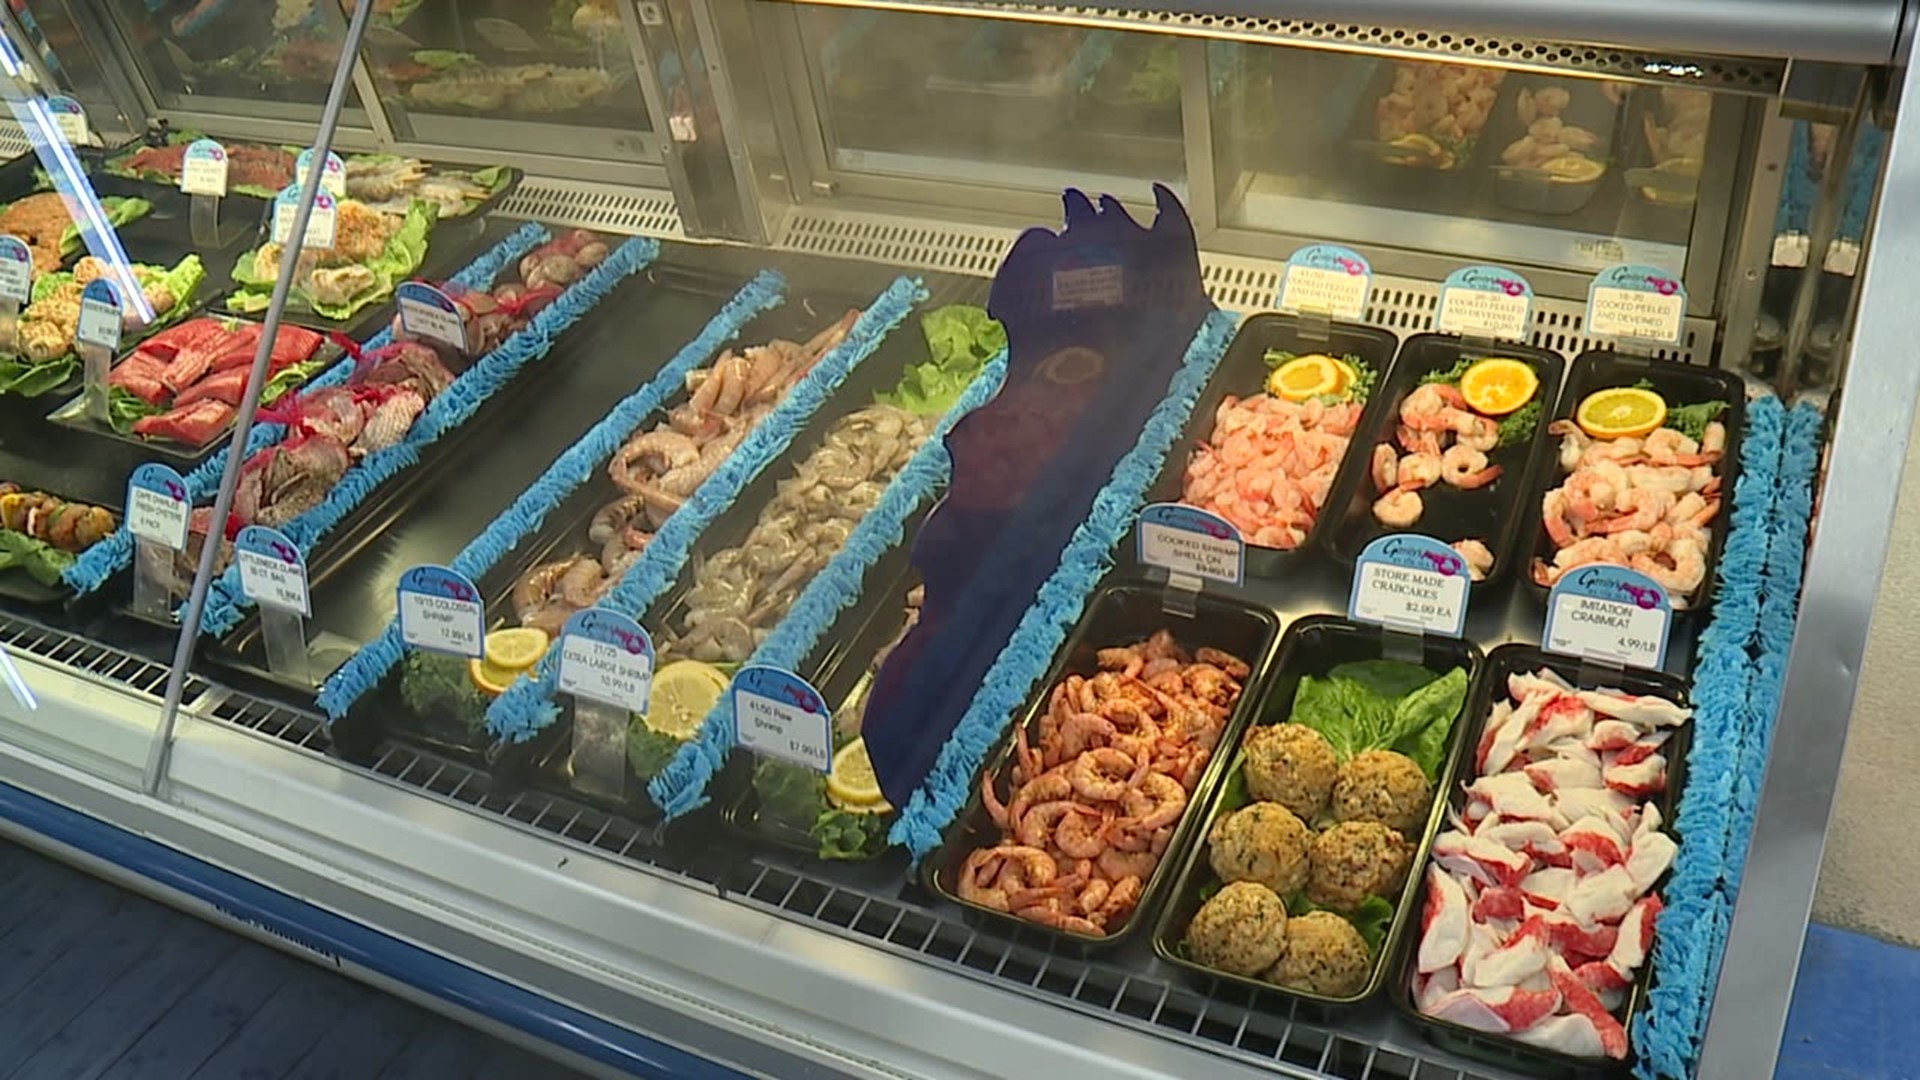 A lot of seafood items aren't available, and if they are, the price has increased dramatically. Business owners tell us it's due to a labor shortage.